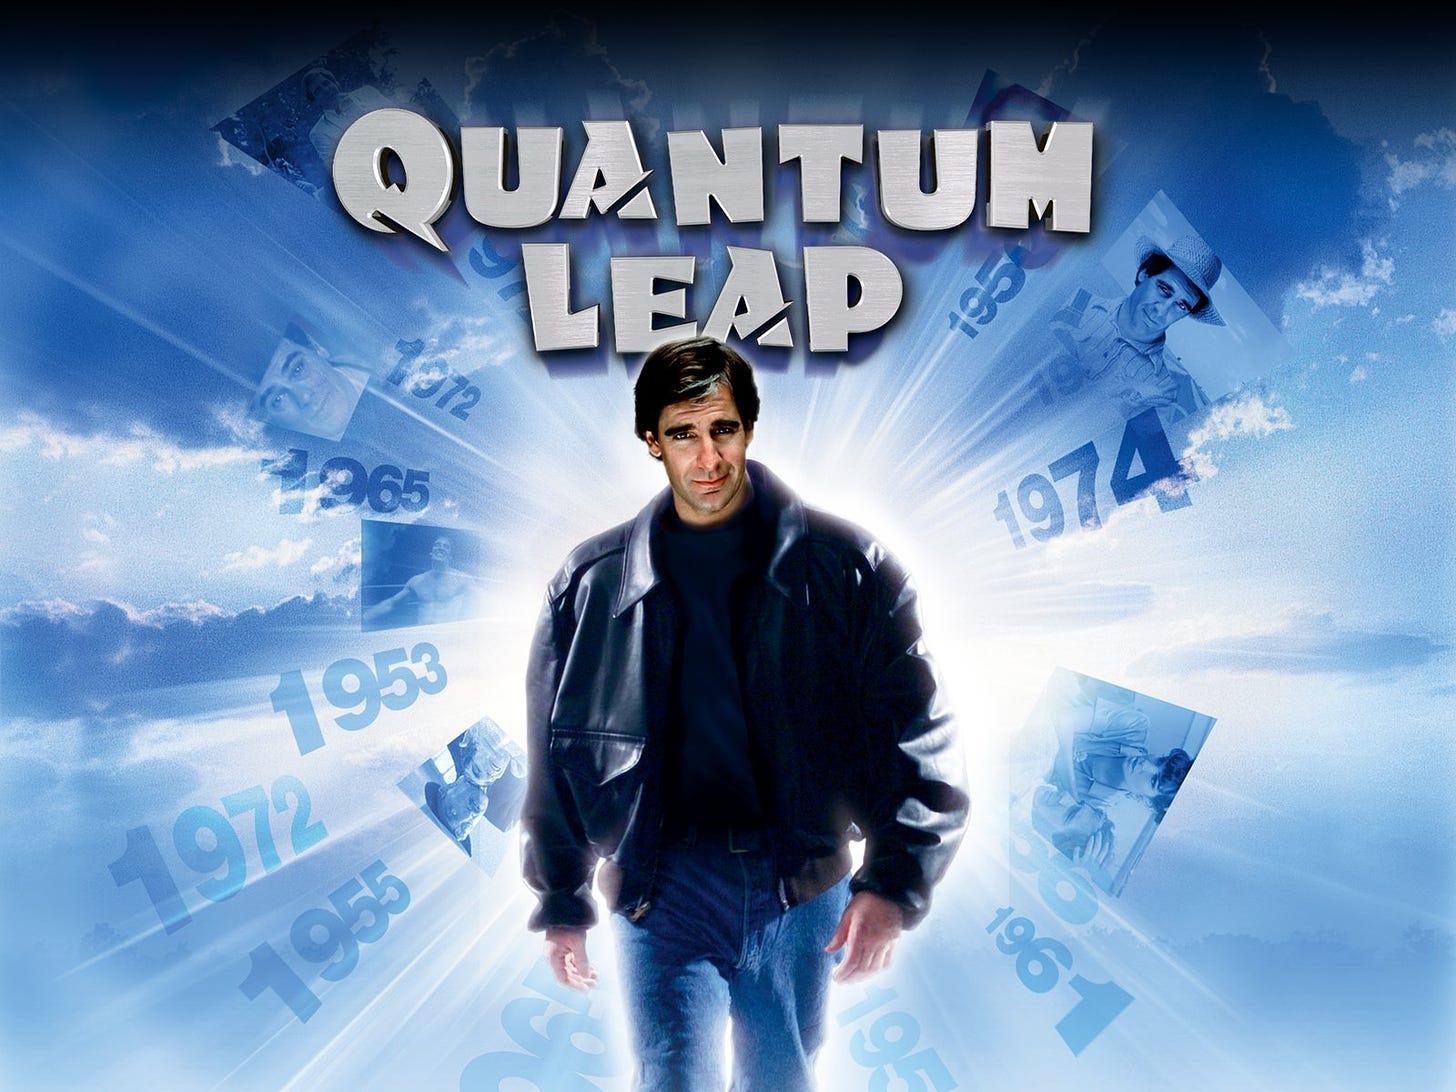 Quantum Leap starring Scott Bakula and Dean Stockwell, check it out by clicking here.